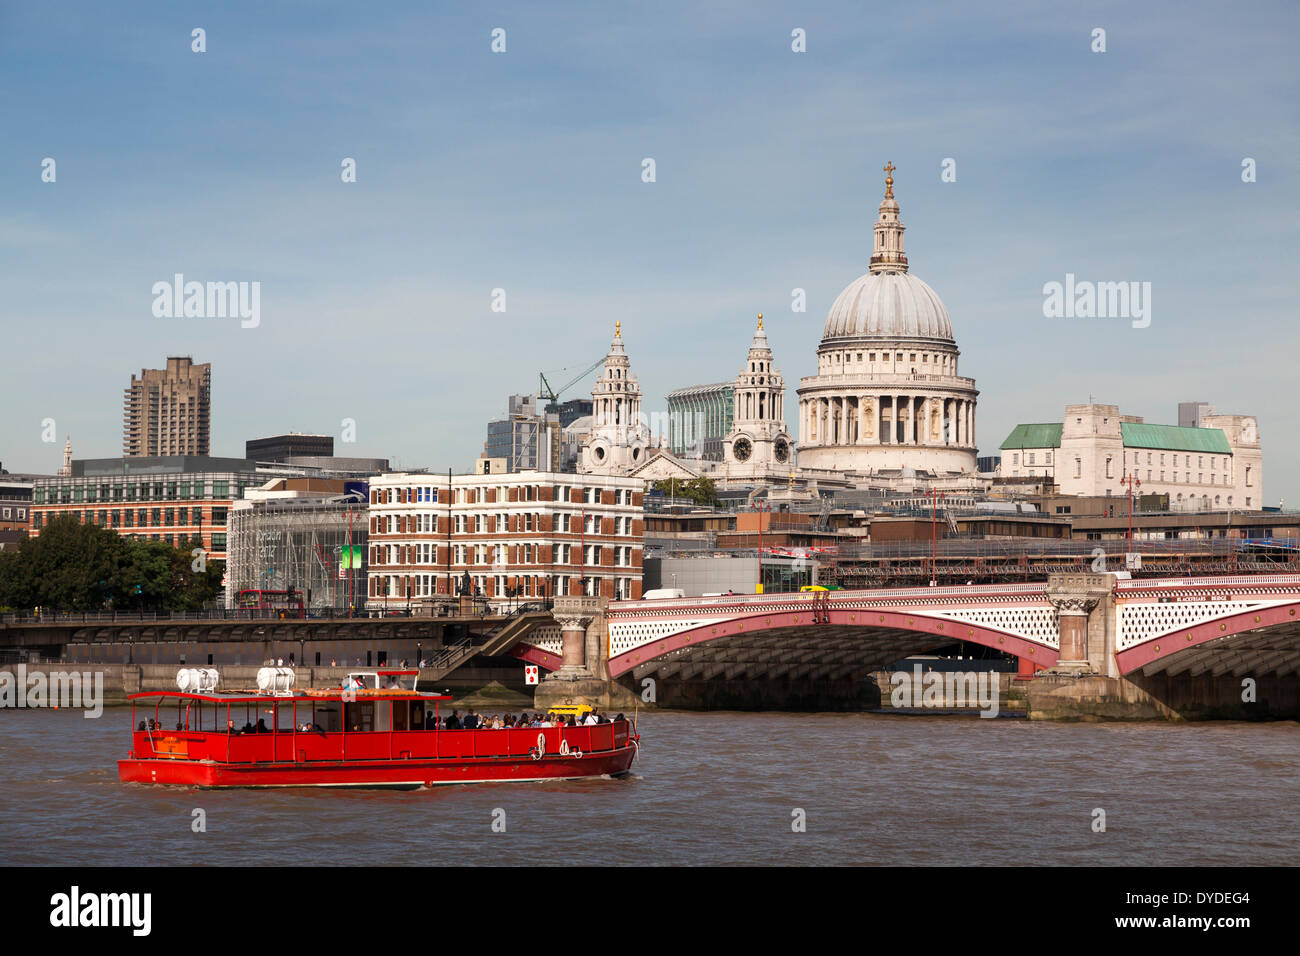 Red river cruiser on the River Thames and St Paul's Cathedral Dome. Stock Photo